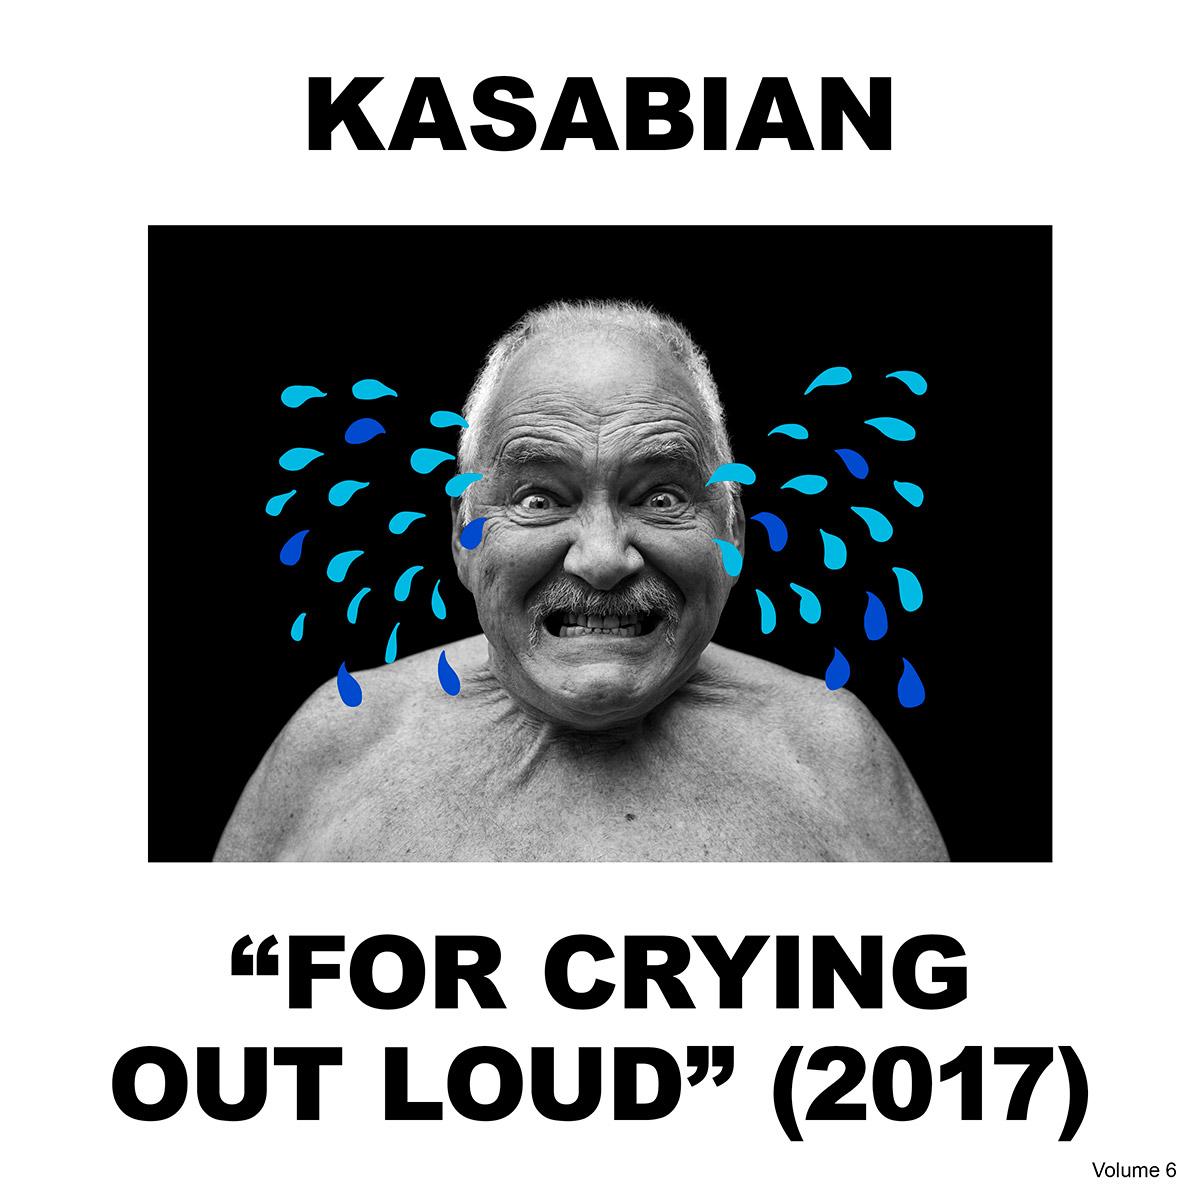 Okładka płyty &quot;For Crying Out Loud&quot; Kasabian class="wp-image-84718" 